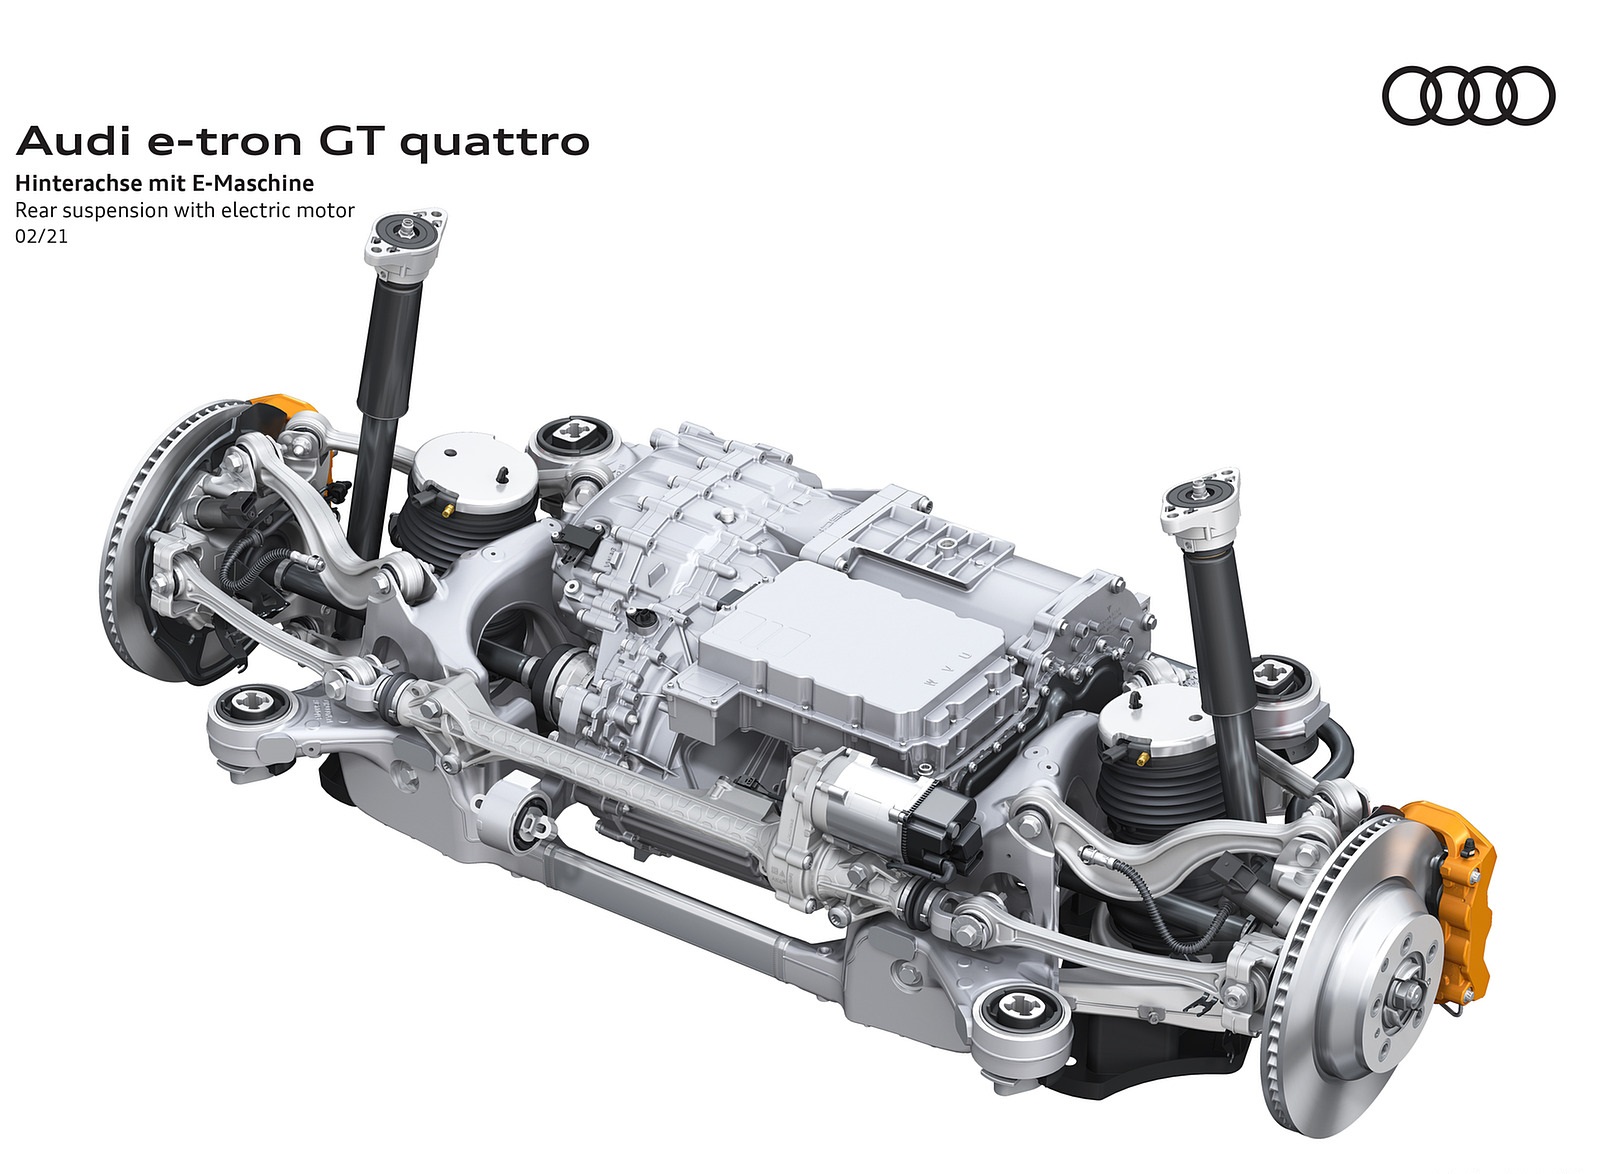 2022 Audi e-tron GT quattro Rear suspension with electric motor Wallpapers #103 of 176